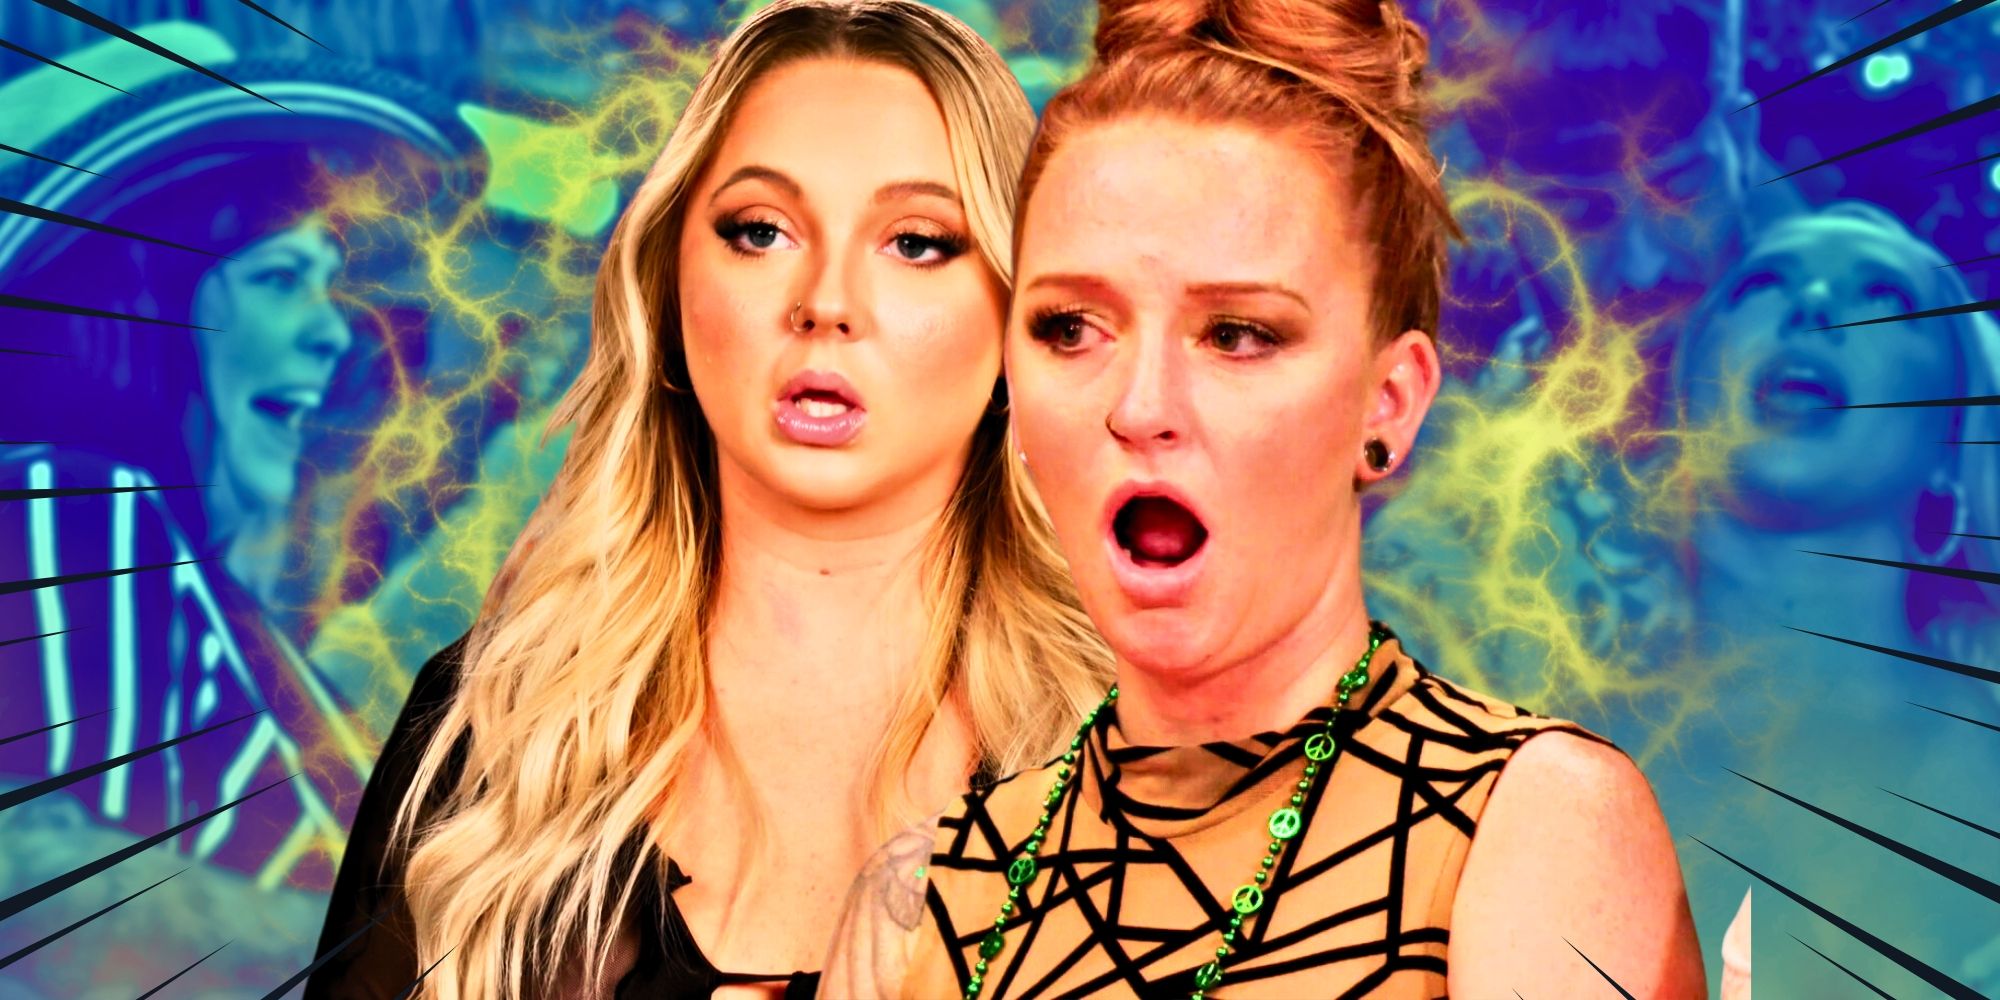 Teen Mom Family Reunion: Jade Cline and Maci Bookout wear shocked facial expressions with Caitlyn Baltierra in the foreground dressed as a pirate.